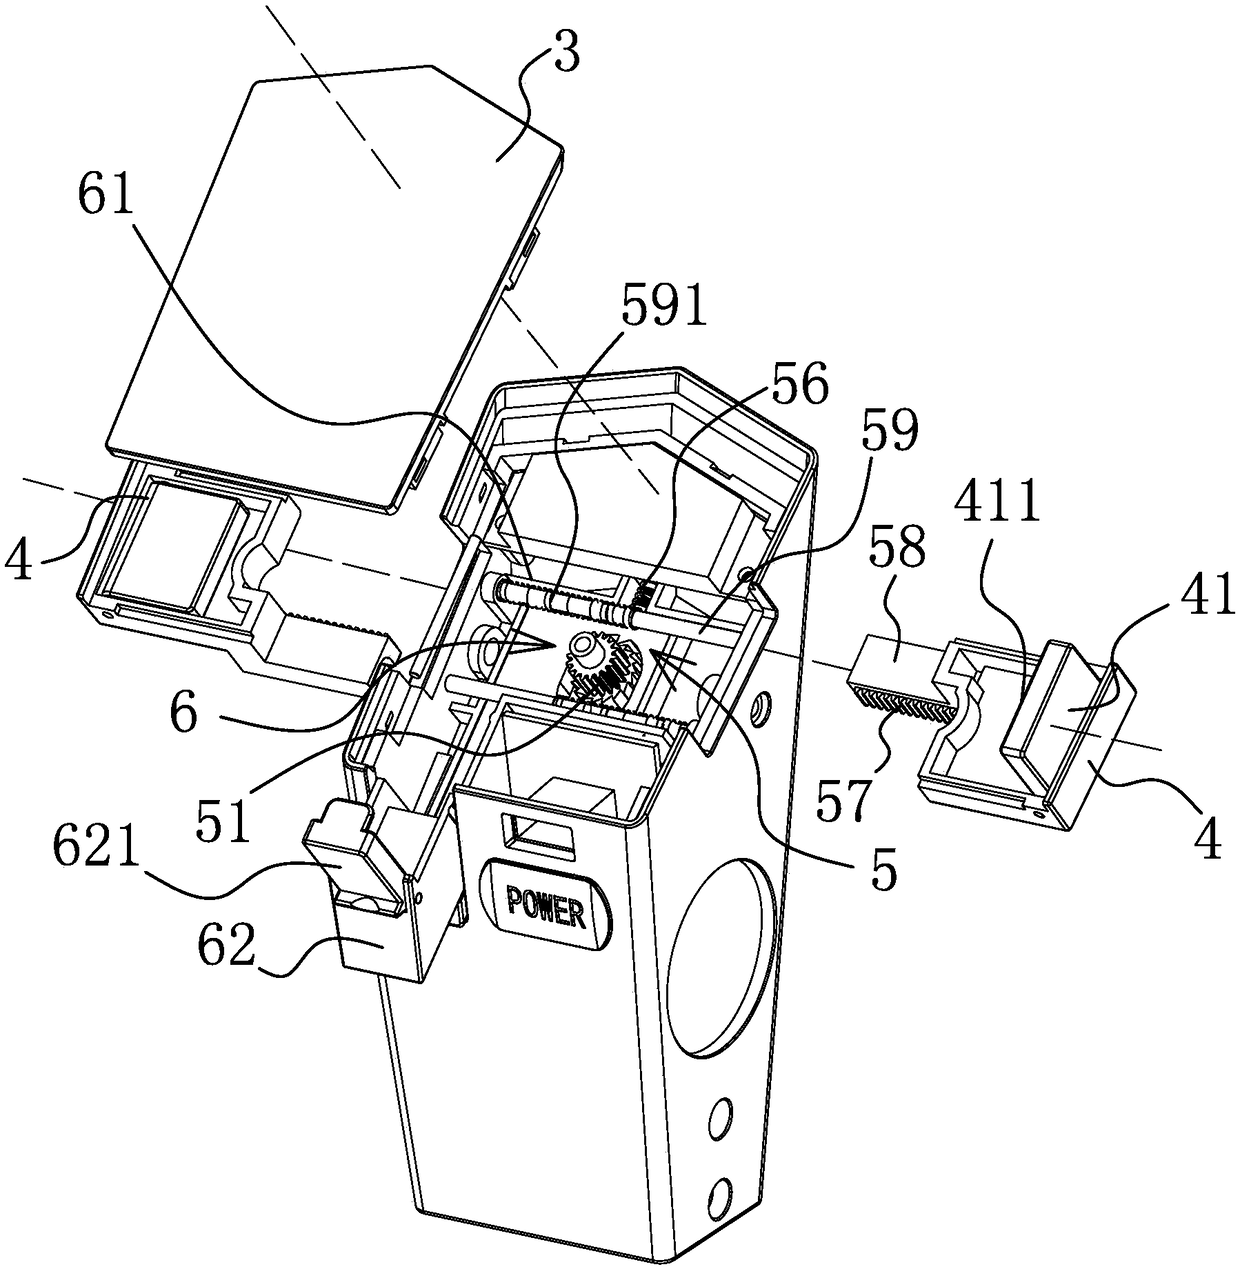 Electronic equipment mounting bracket for electric balance car